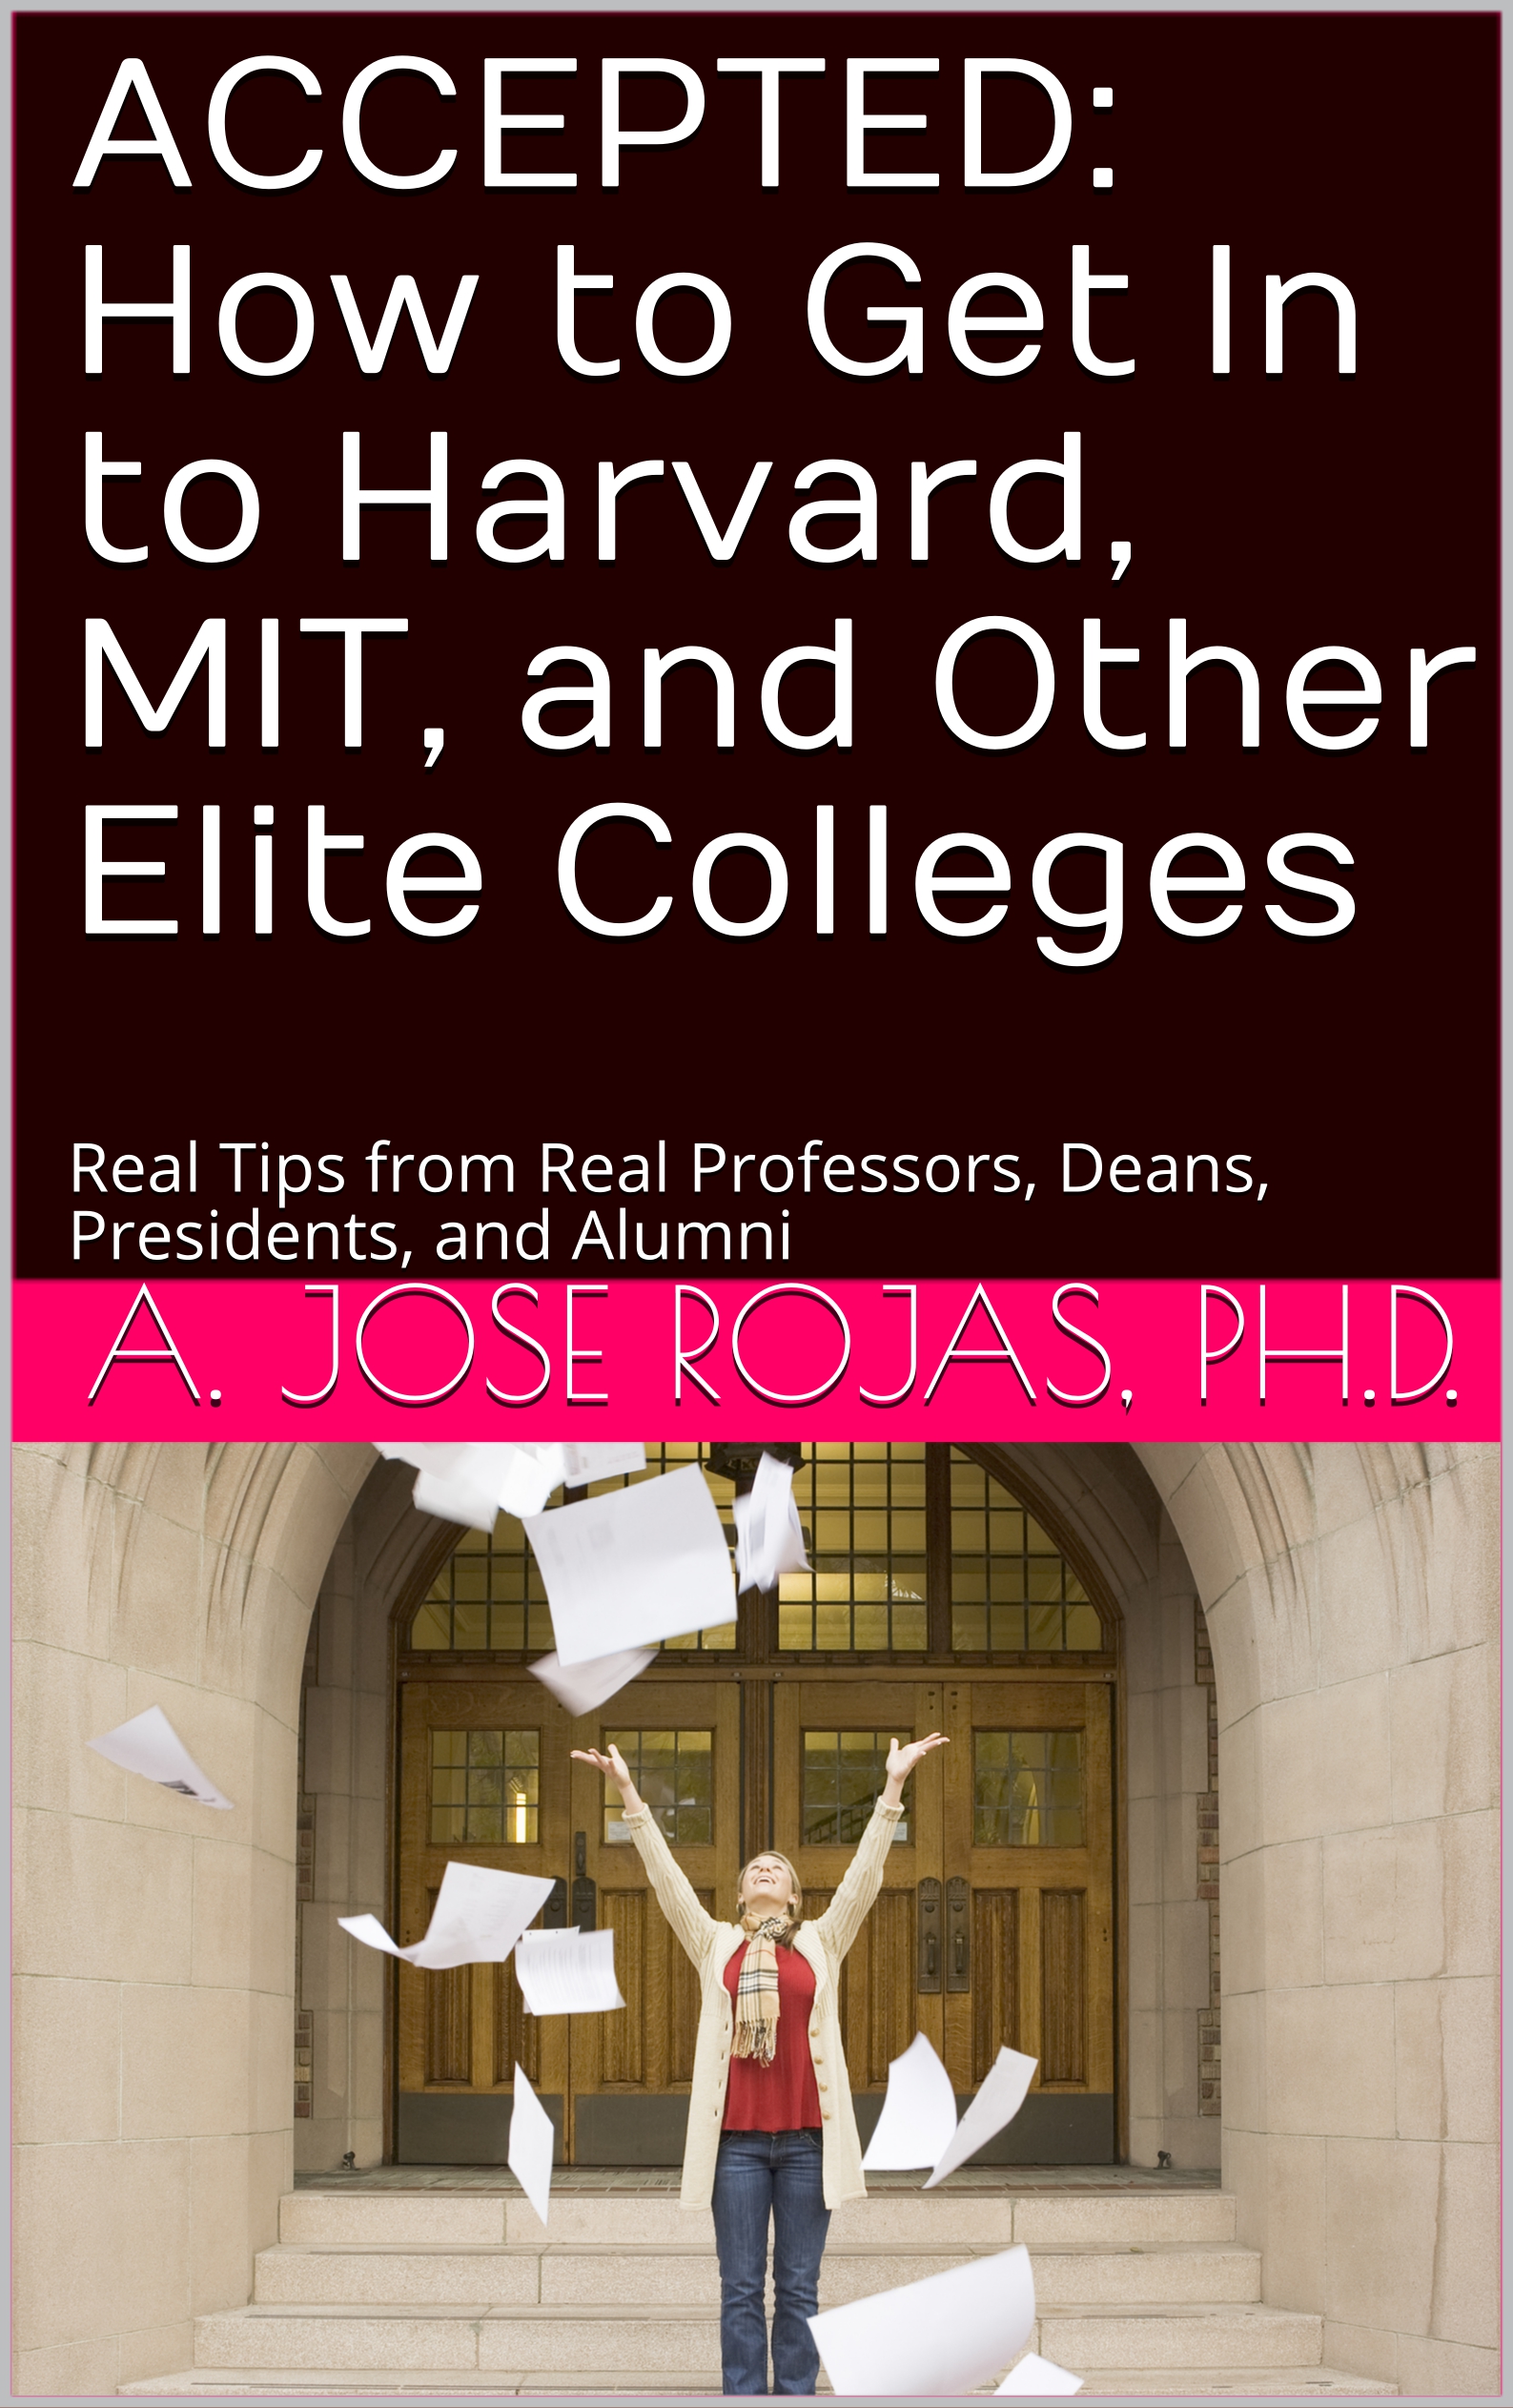 FREE: Accepted: How to Get In to Harvard, MIT, and Other Elite Colleges by A. Jose Rojas, Ph.D.